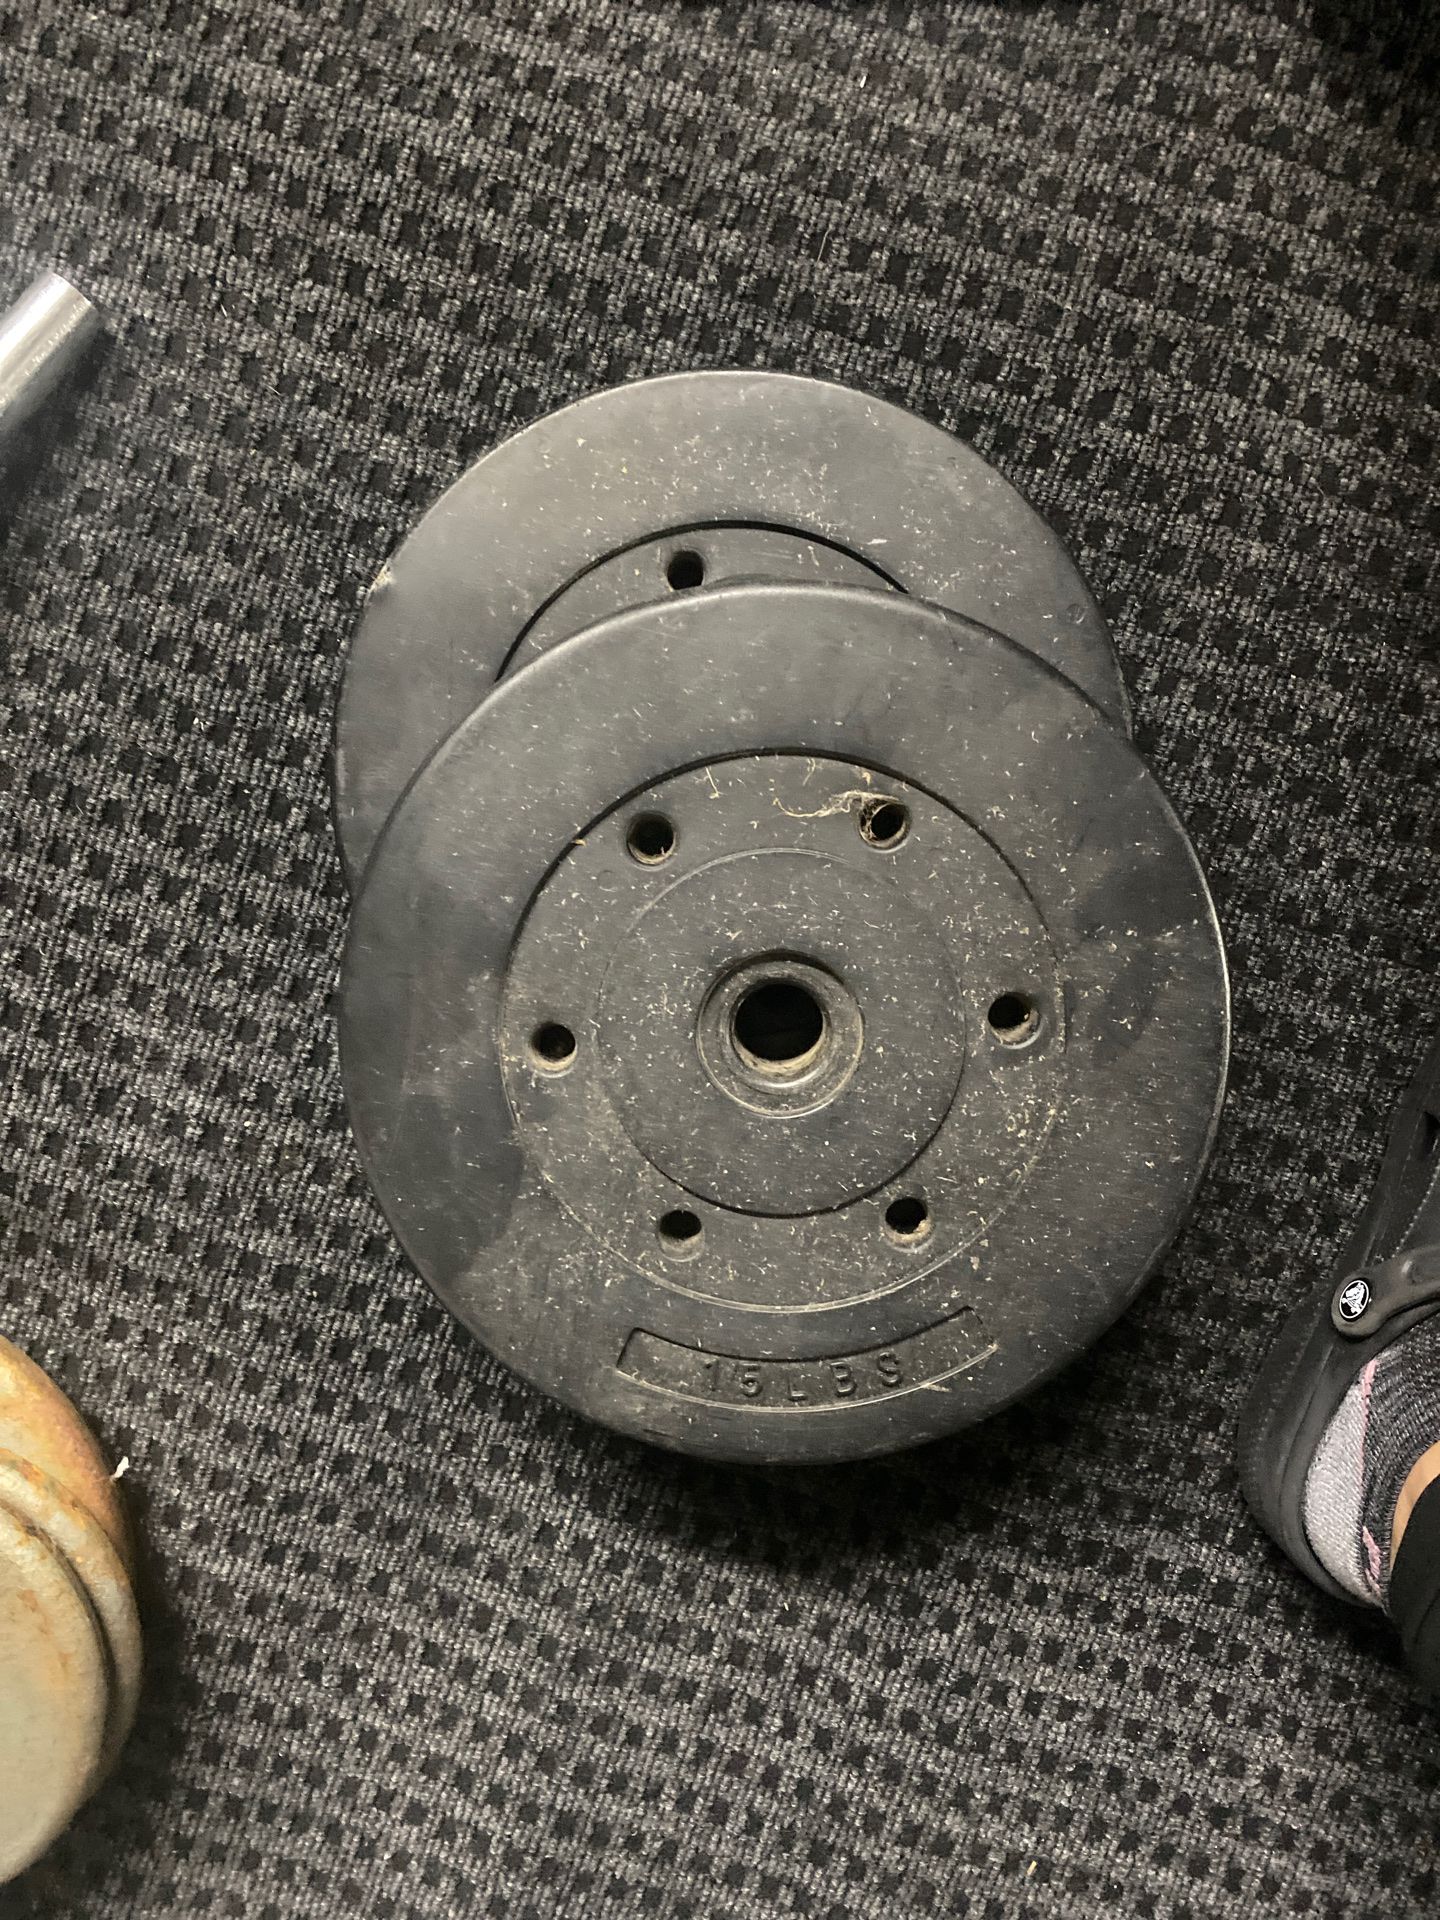 15lb weight plates for standard 1 inch bar